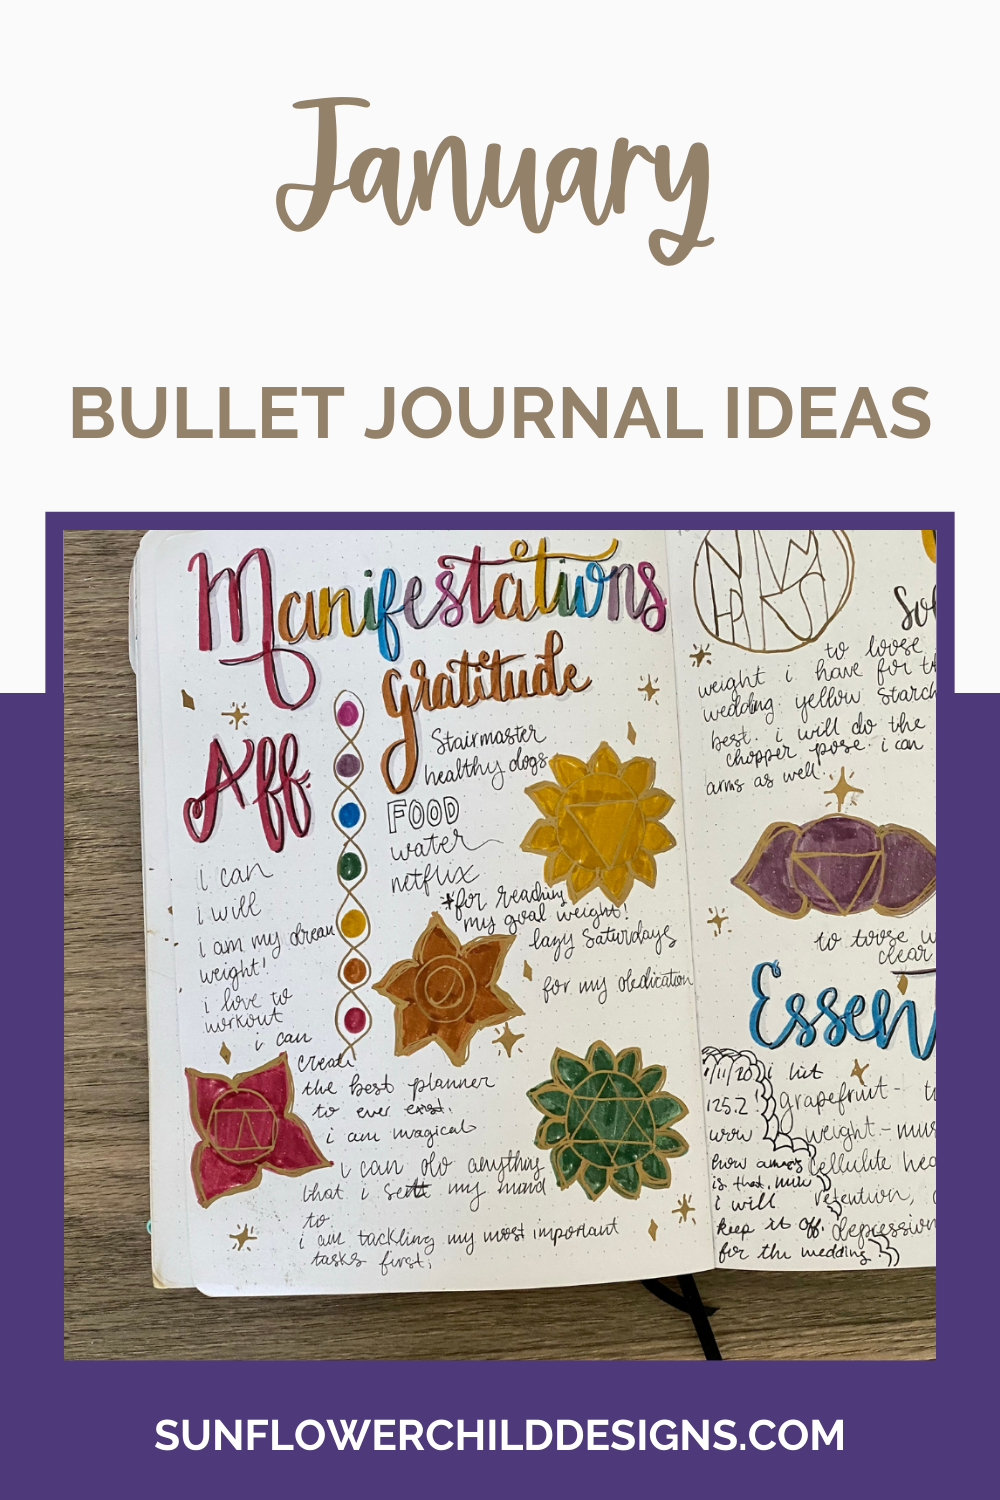 witchy-bullet-journal-january-bullet-journal-ideas 6.png